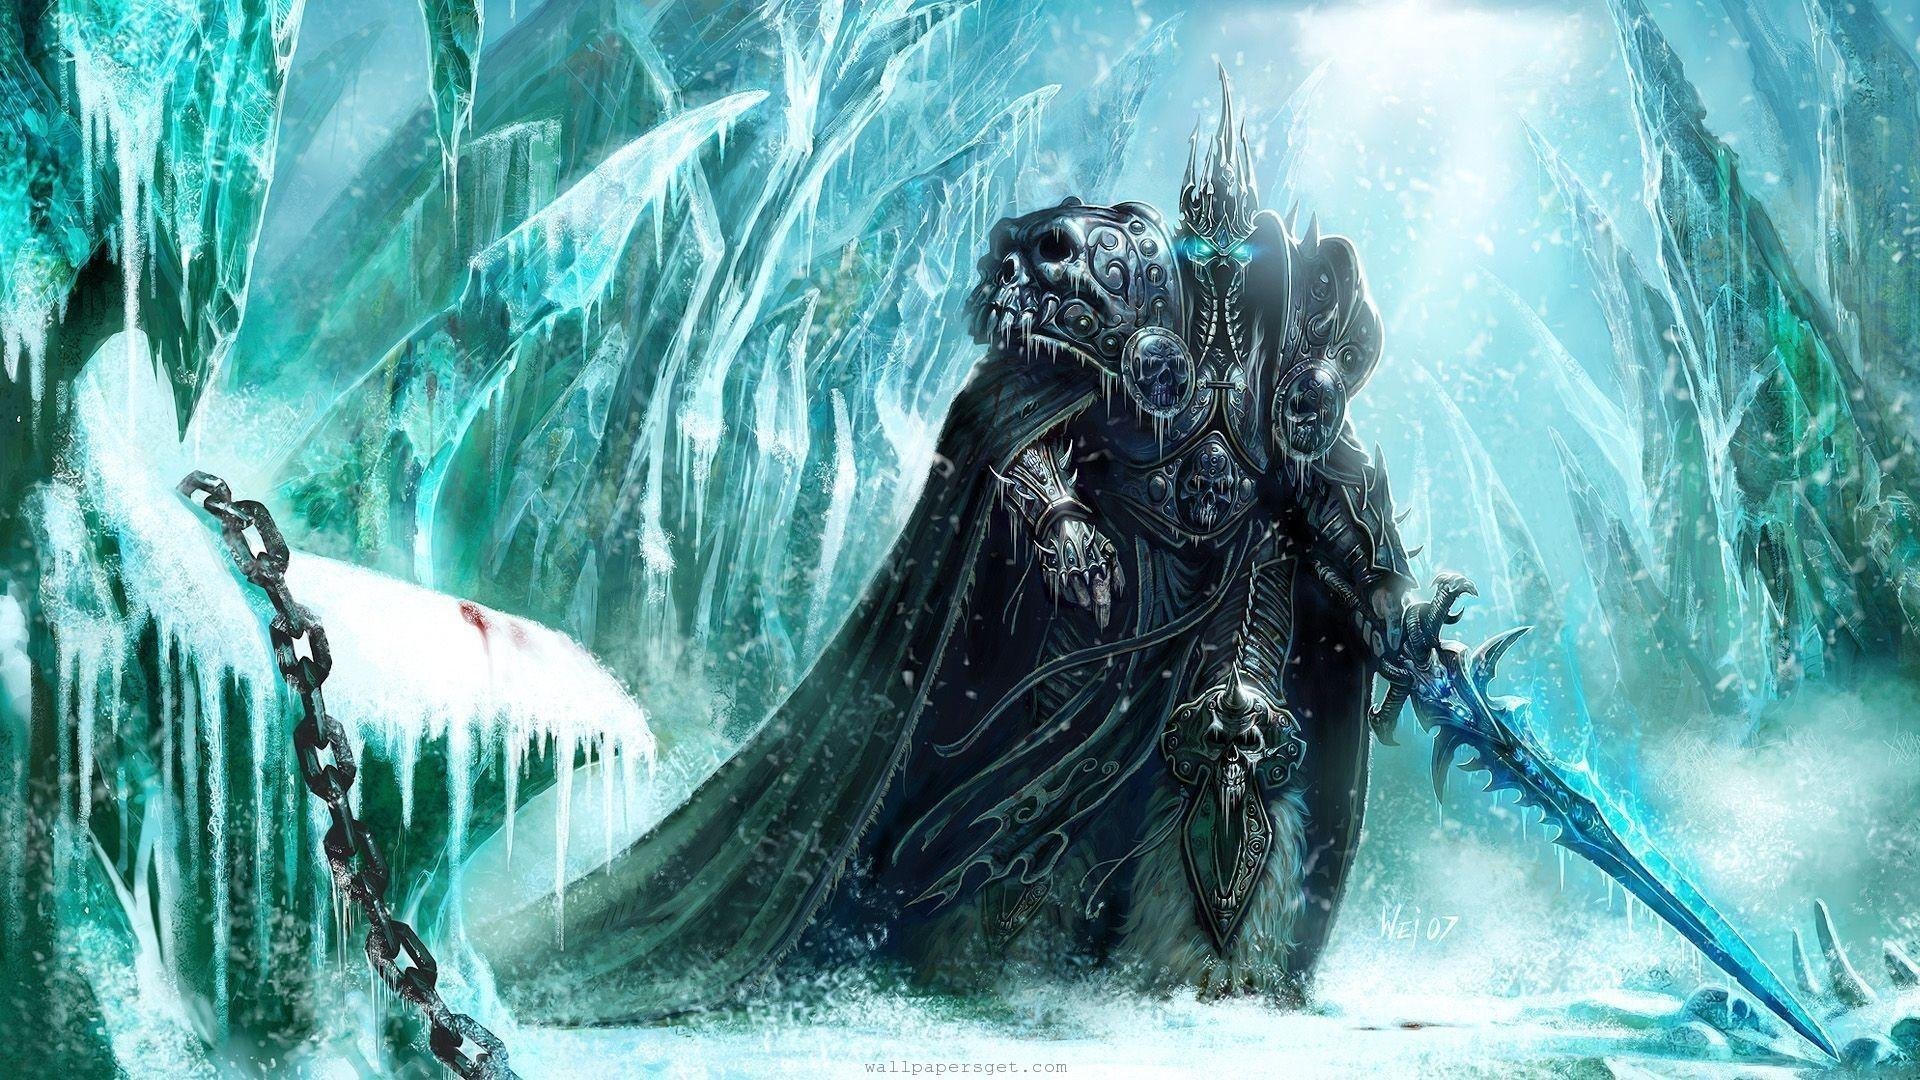 Best World Of Warcraft: Wrath Of The Lich King wallpaper ID:451144 for High Resolution 1080p computer